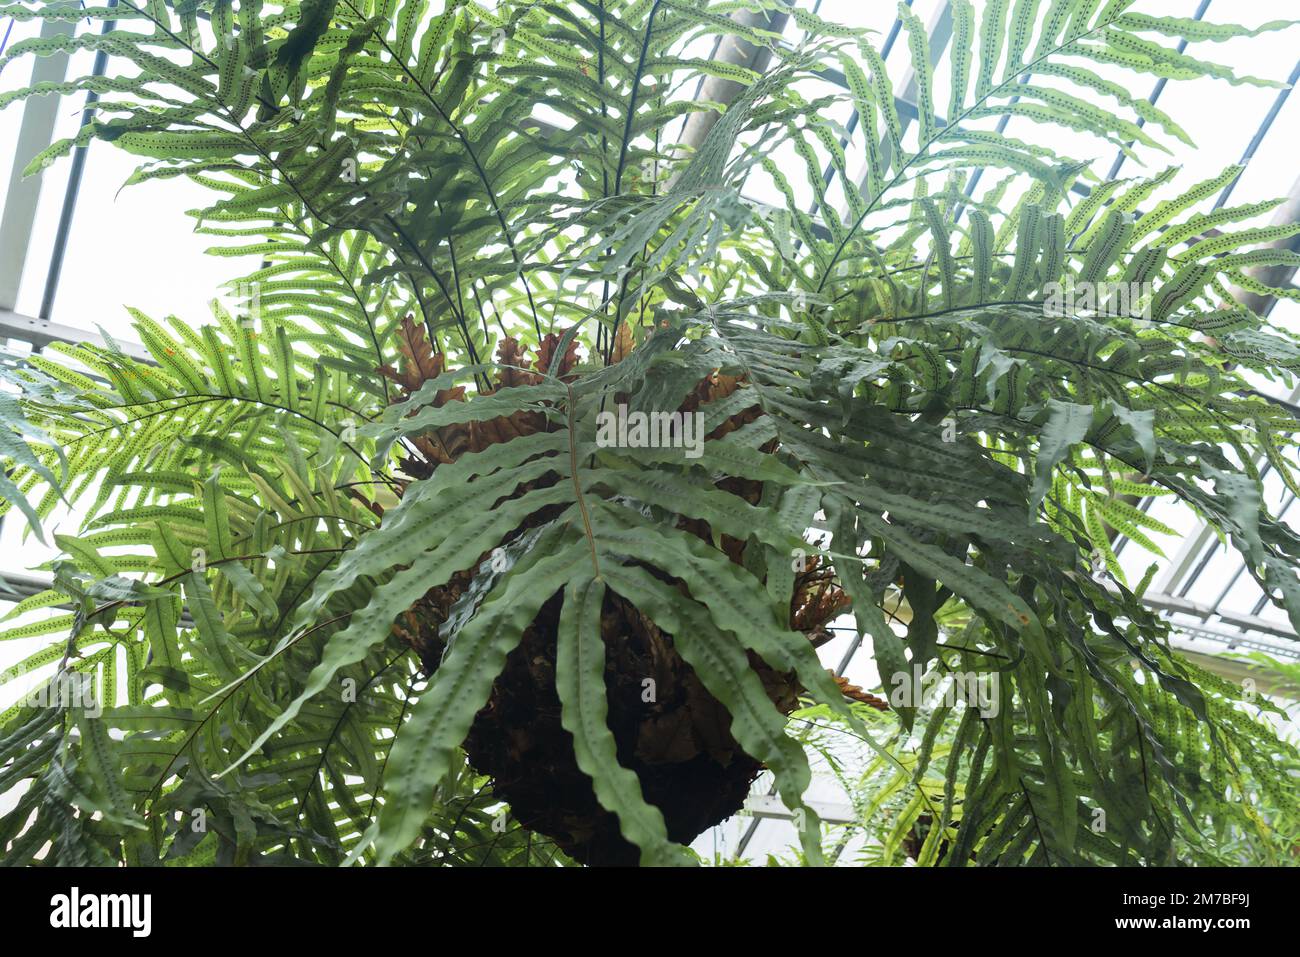 view from below on growing drynaria fern plant Stock Photo